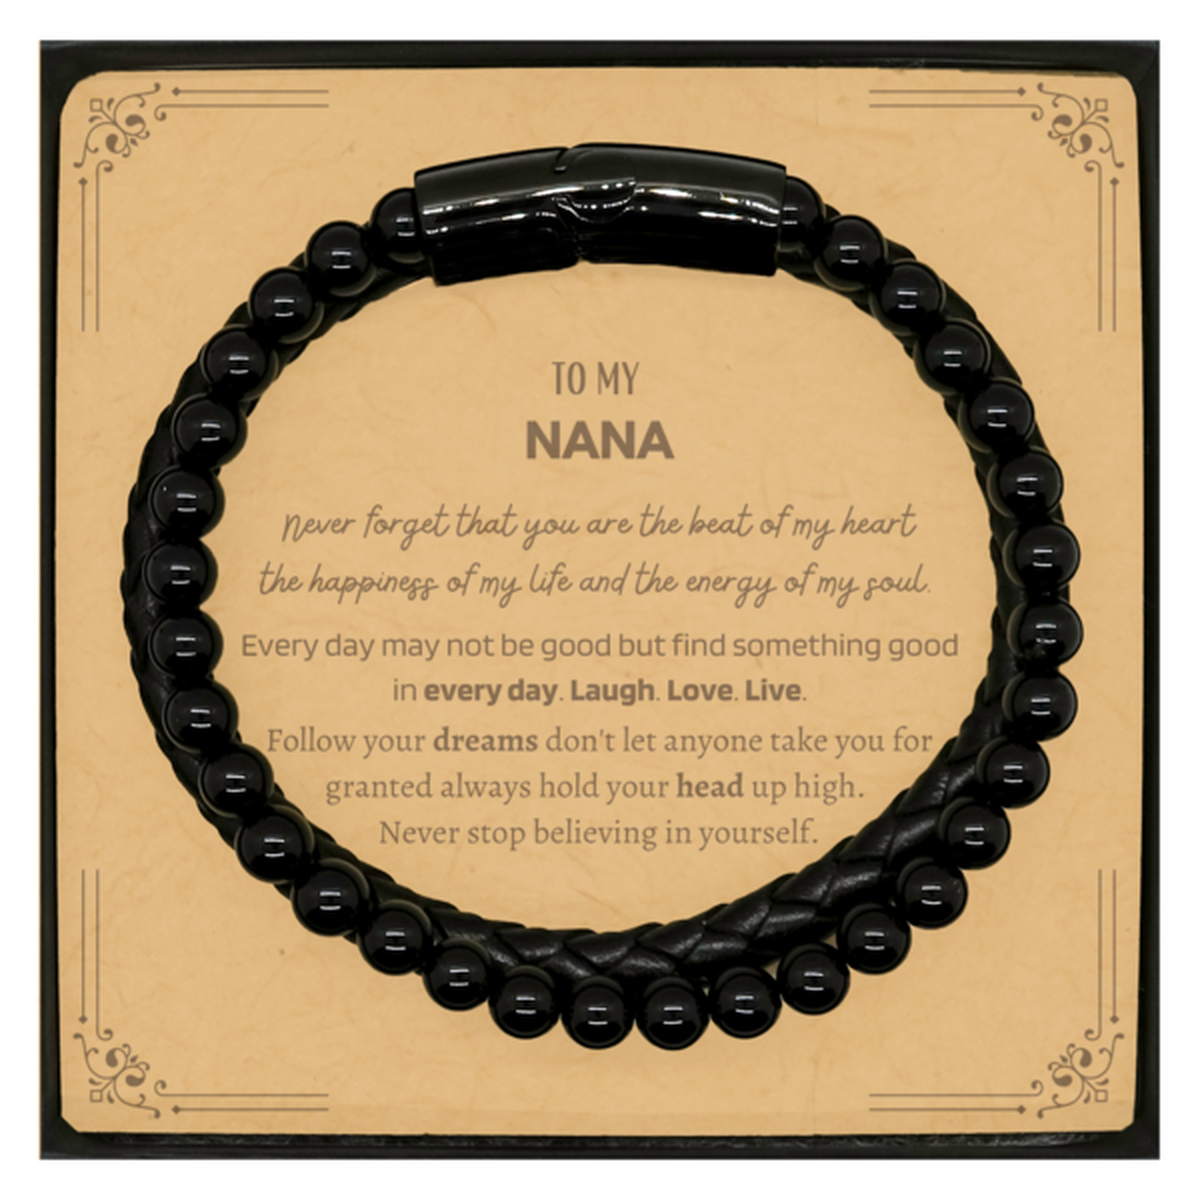 To My Nana Message Card Gifts, Christmas Nana Stone Leather Bracelets Present, Birthday Unique Motivational For Nana, To My Nana Never forget that you are the beat of my heart the happiness of my life and the energy of my soul